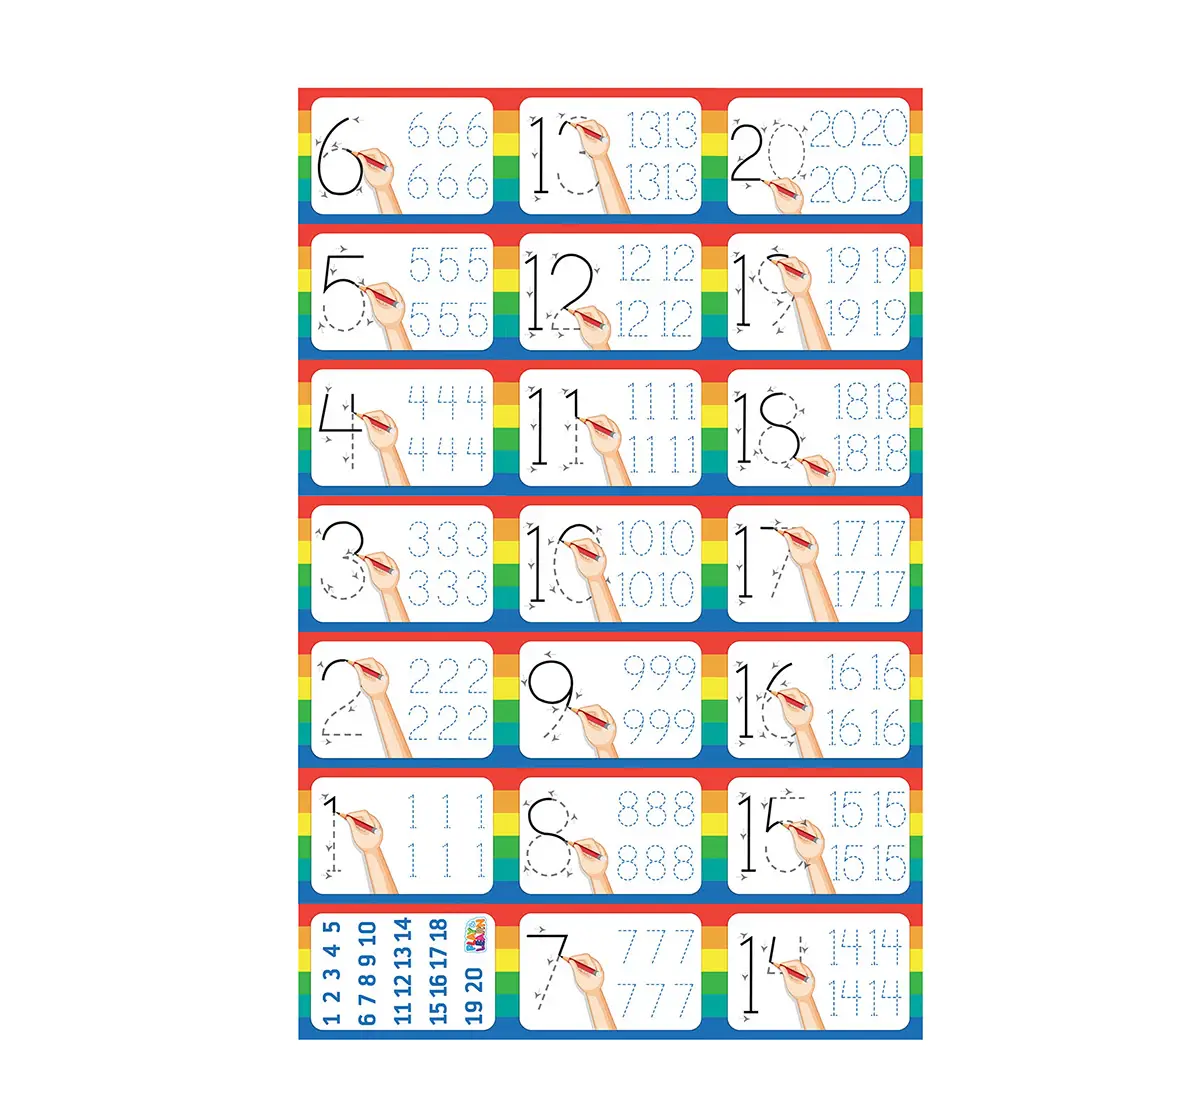 Play & Learn Flash Cards Numbers - Let'S Learn And Write Numbers, 2Y+ (Multicolor)